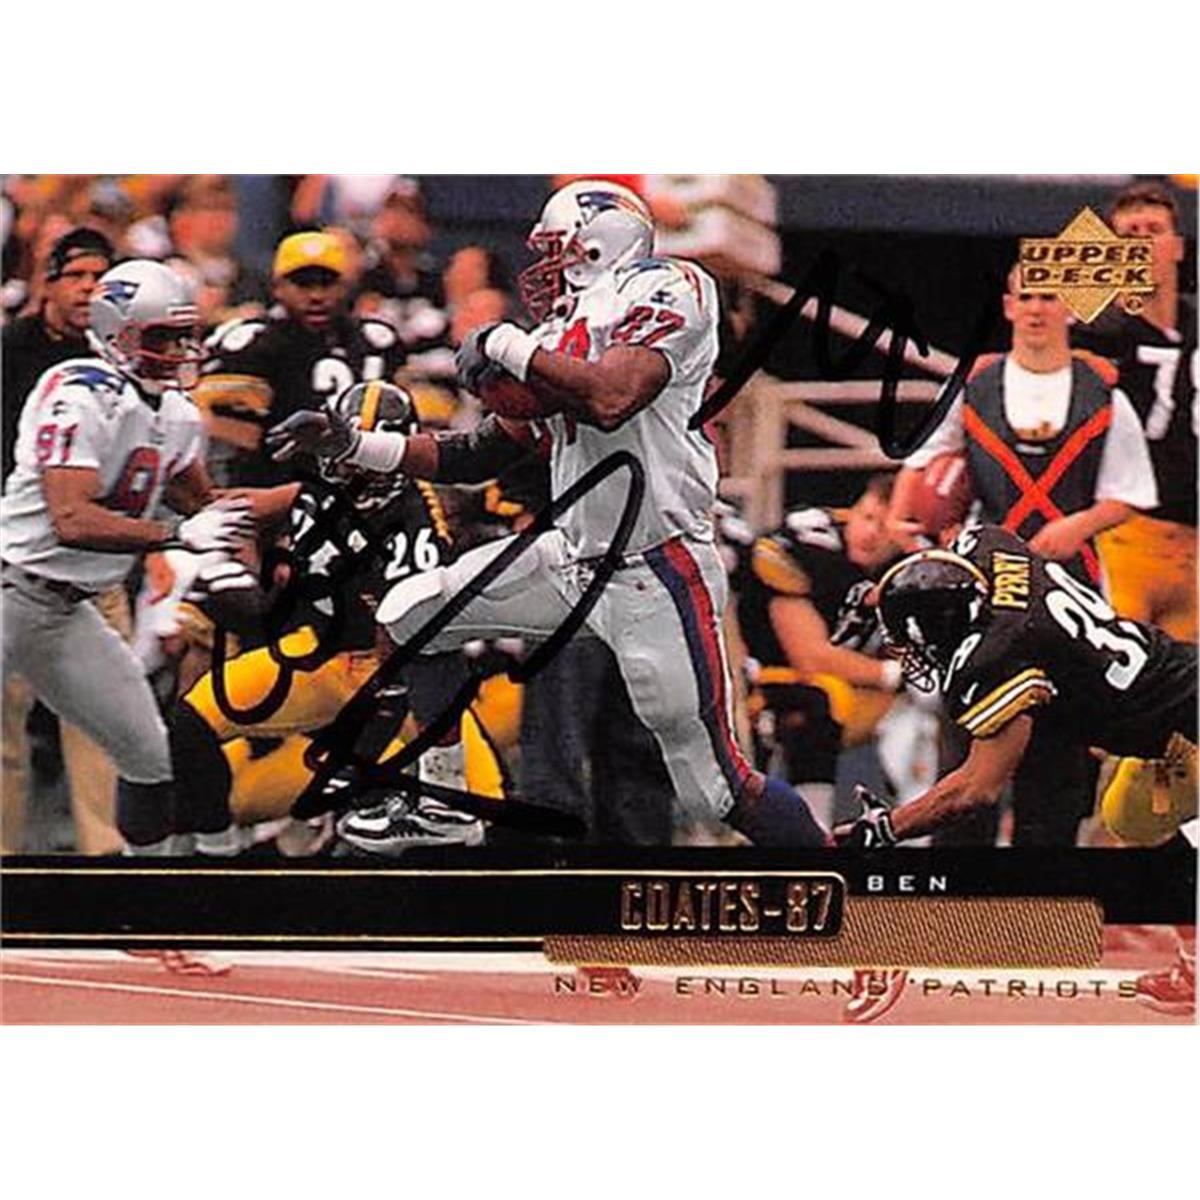 Picture of Autograph Warehouse 444727 New England Patriots 1999 Upper Deck 124 Ben Coates Autographed Football Card